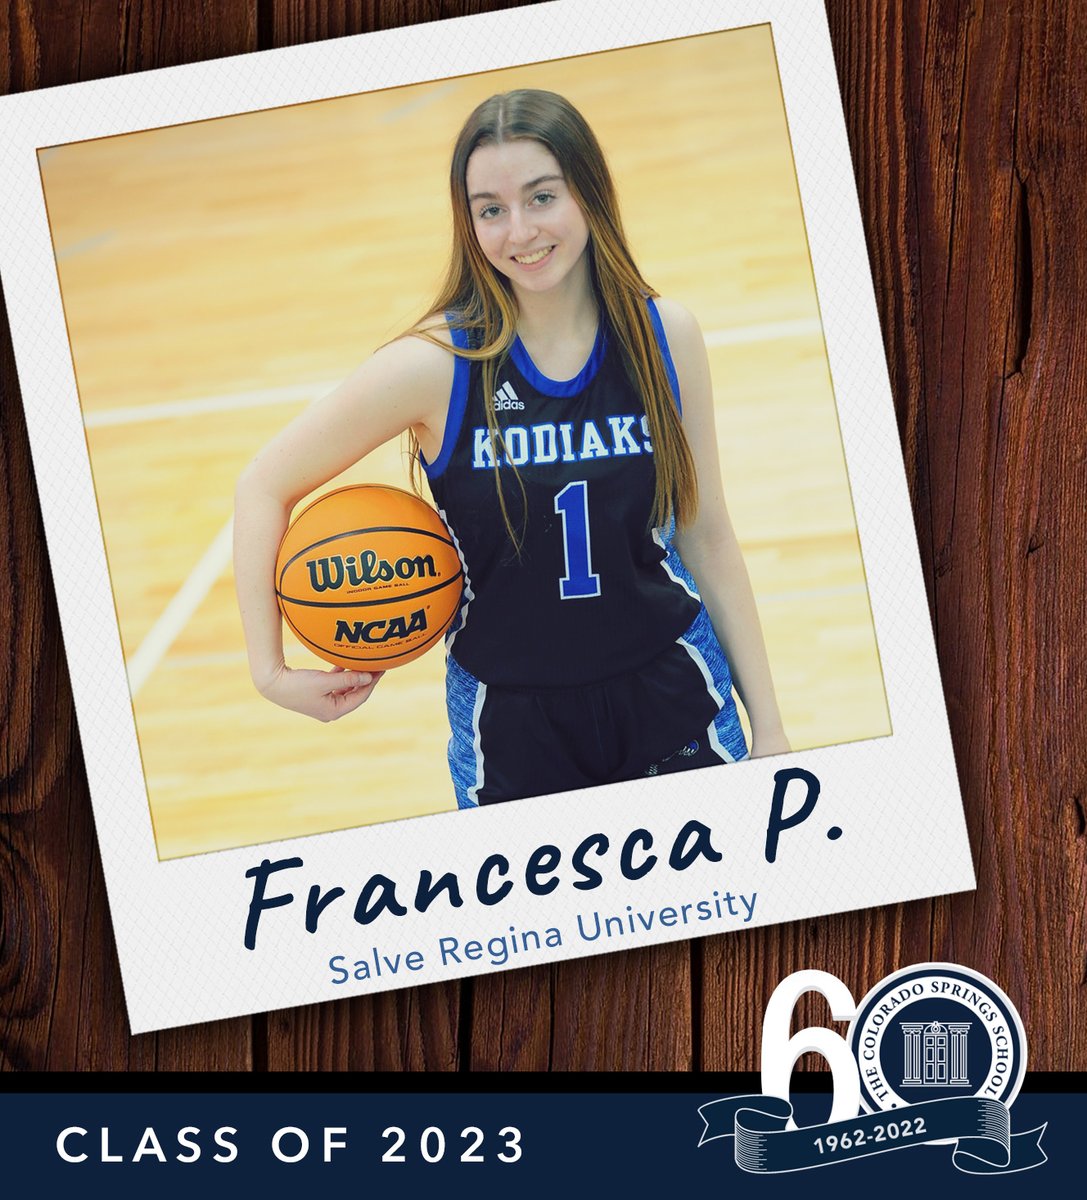 Francesca P., we've watched you shine as a mentor for the Full STEAM Ahead summer program & in athletics, where you were named the most improved girls' varsity basketball player & placed 4th in doubles tennis at the Regional tournament. @salveregina #CSSClassOf2023 #KodiakPride